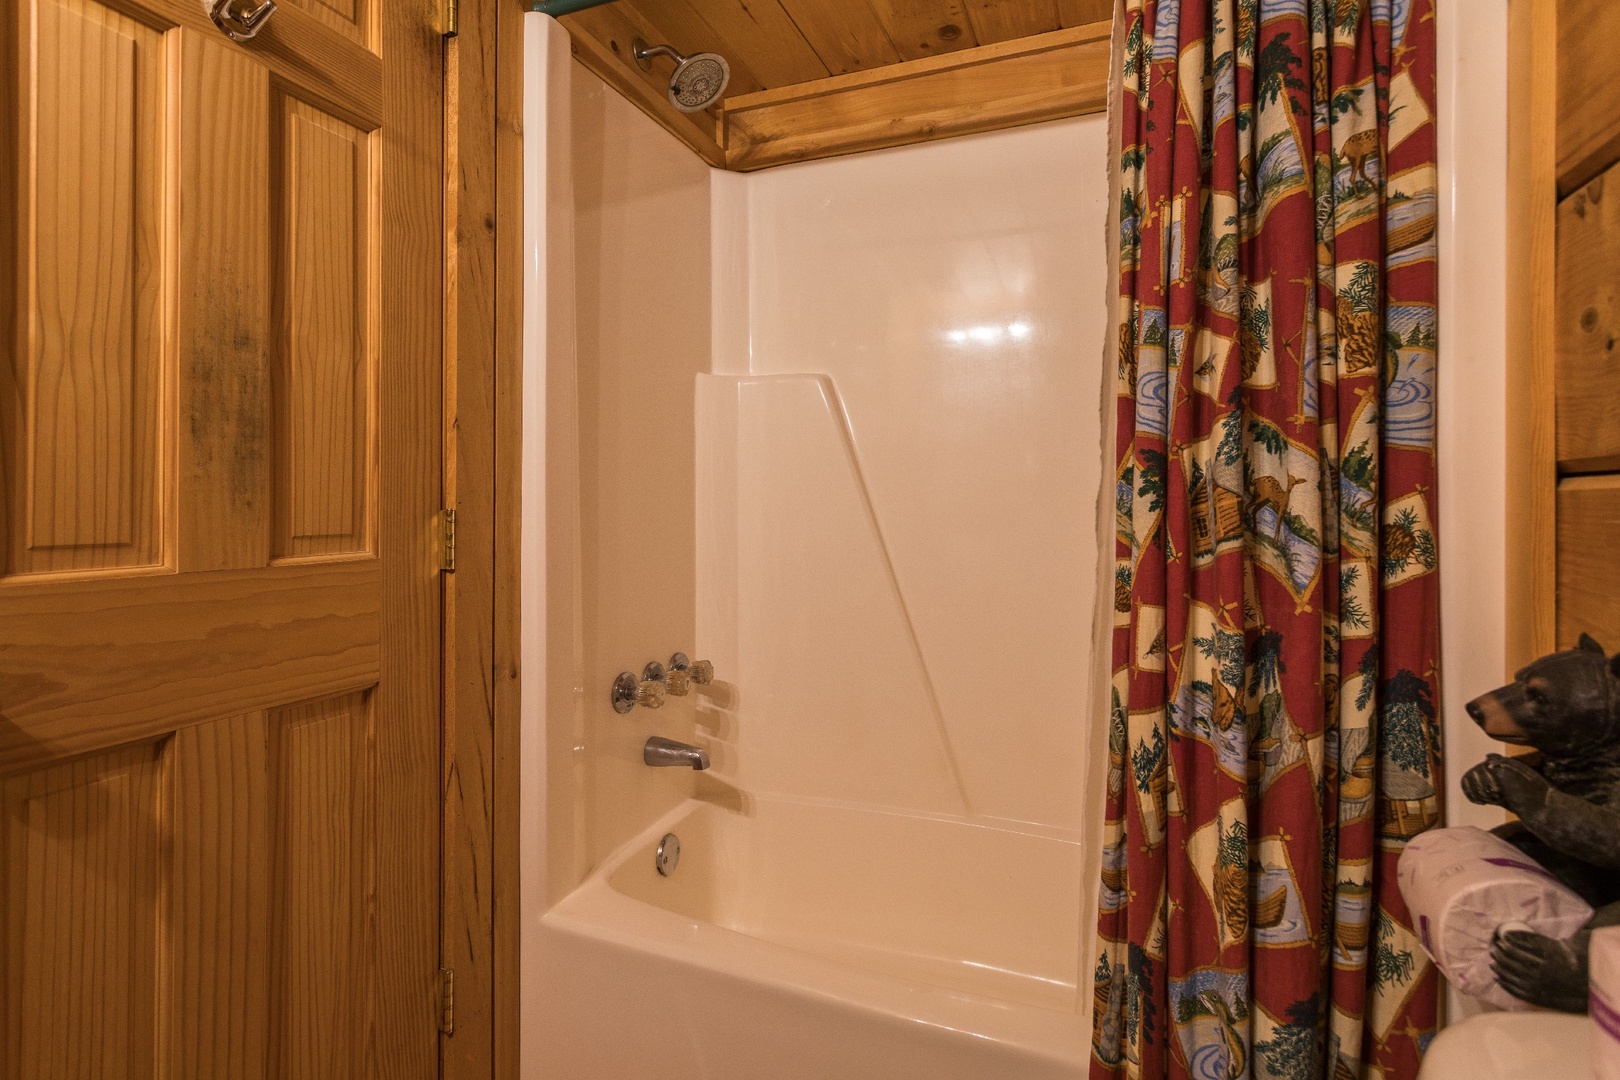 Bathroom with a tub and shower at Boogie Bear, a 1-bedroom cabin rental located in Gatlinburg